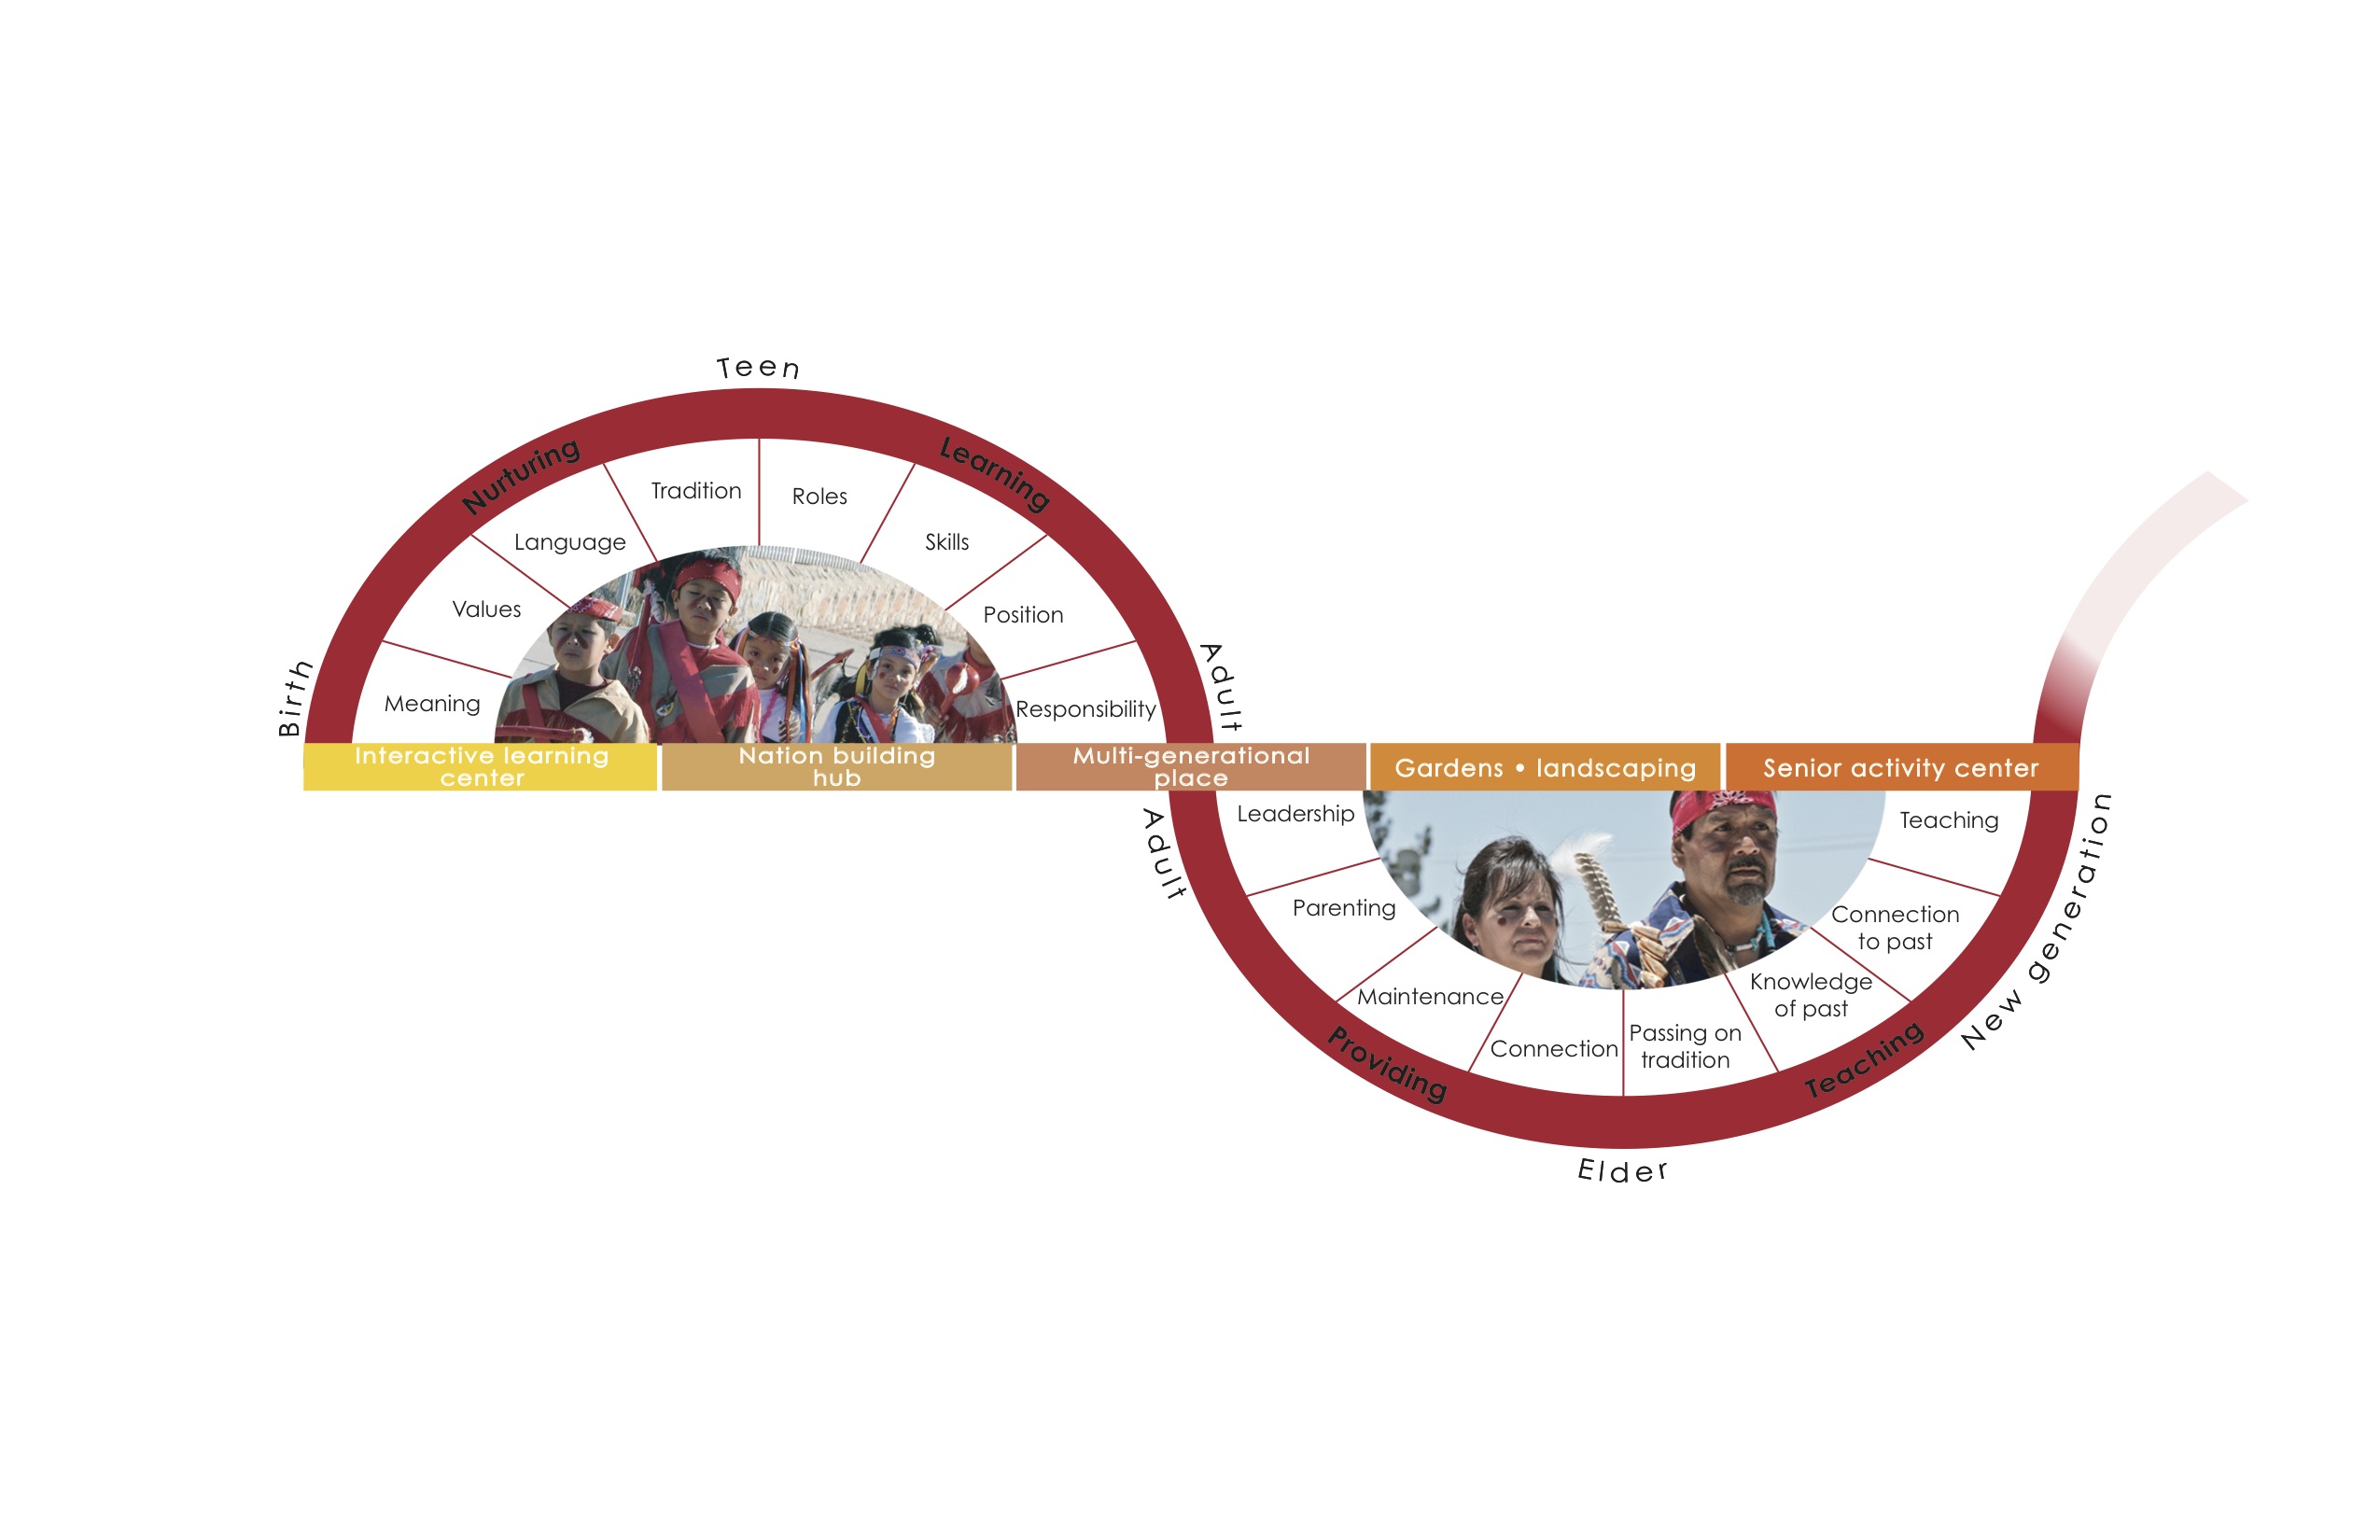 timeline of an individual's life in relation to their community.